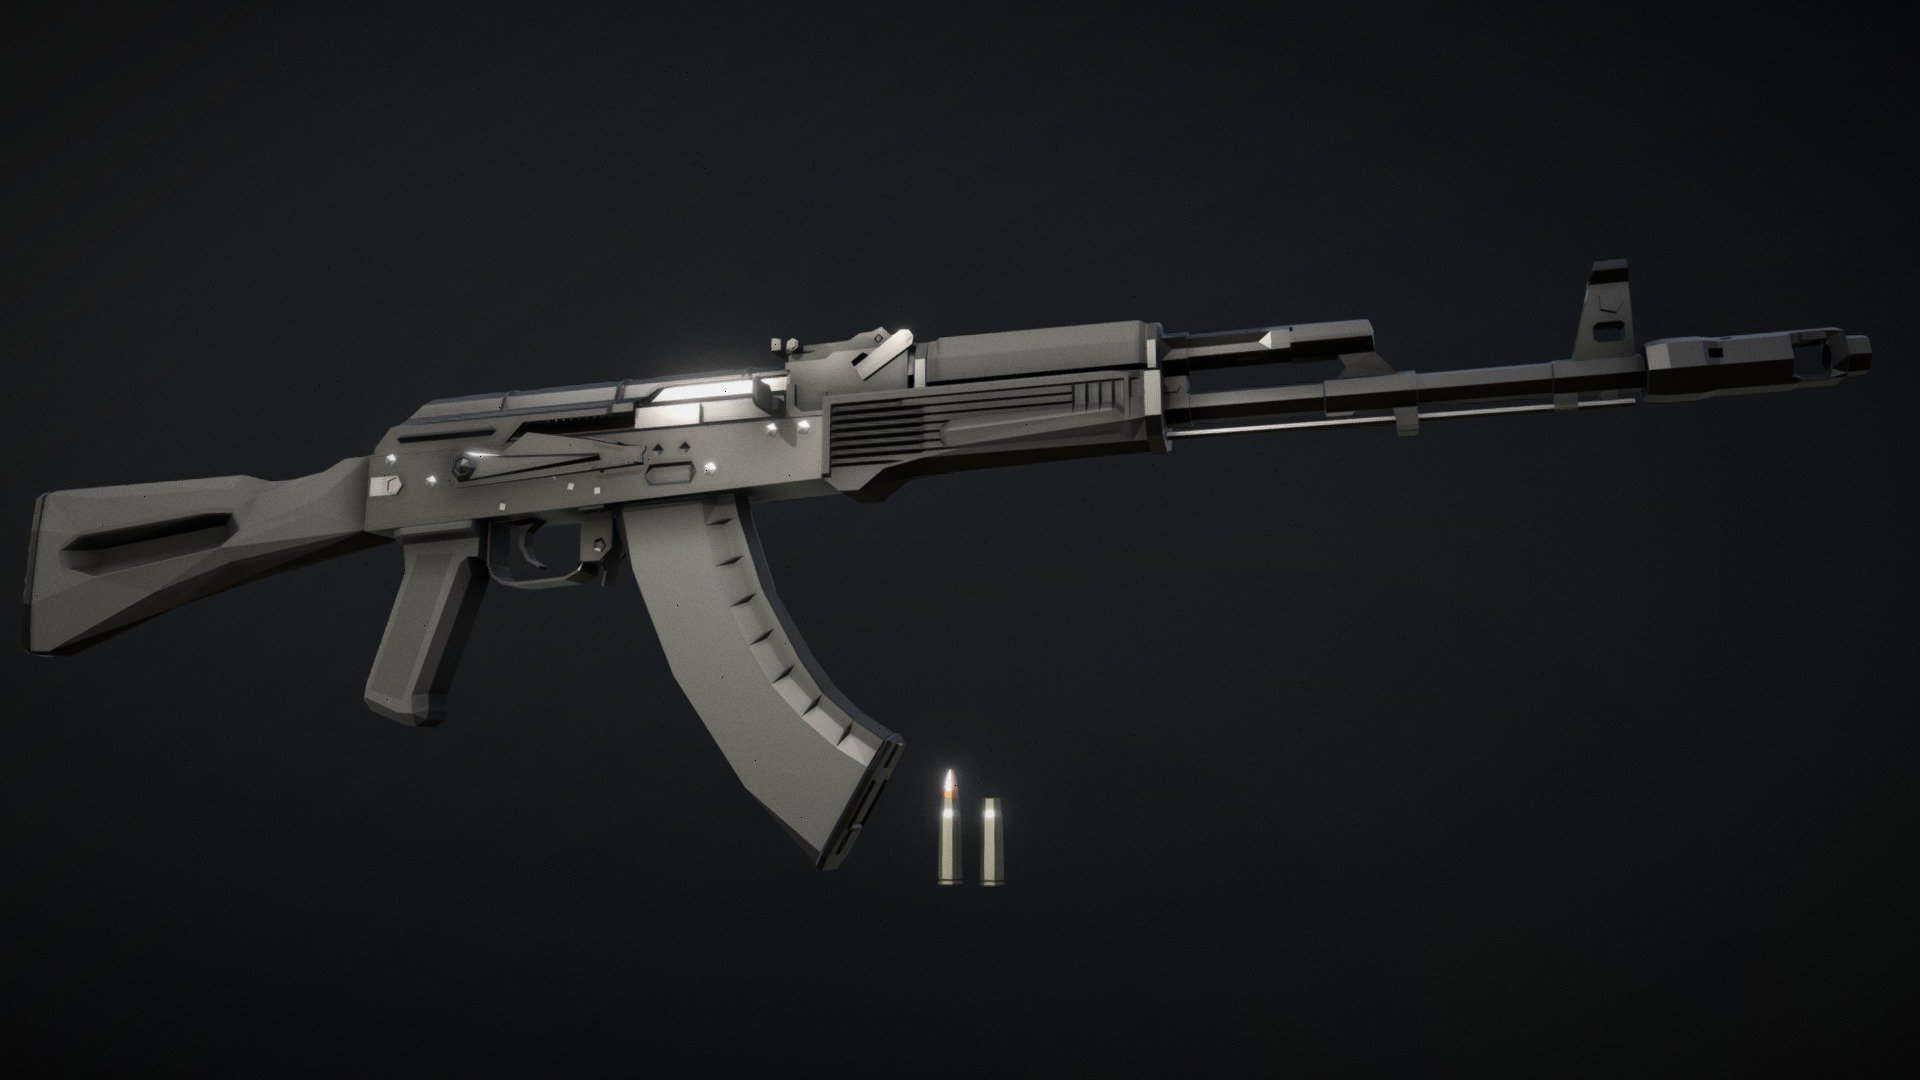 Low Poly model of the AK-103, the 100-series modernization of the popular and well-known AKM, with folding stock, attachment rail, polymer furniture, an improved muzzle brake/compensator, and magazine 3d model